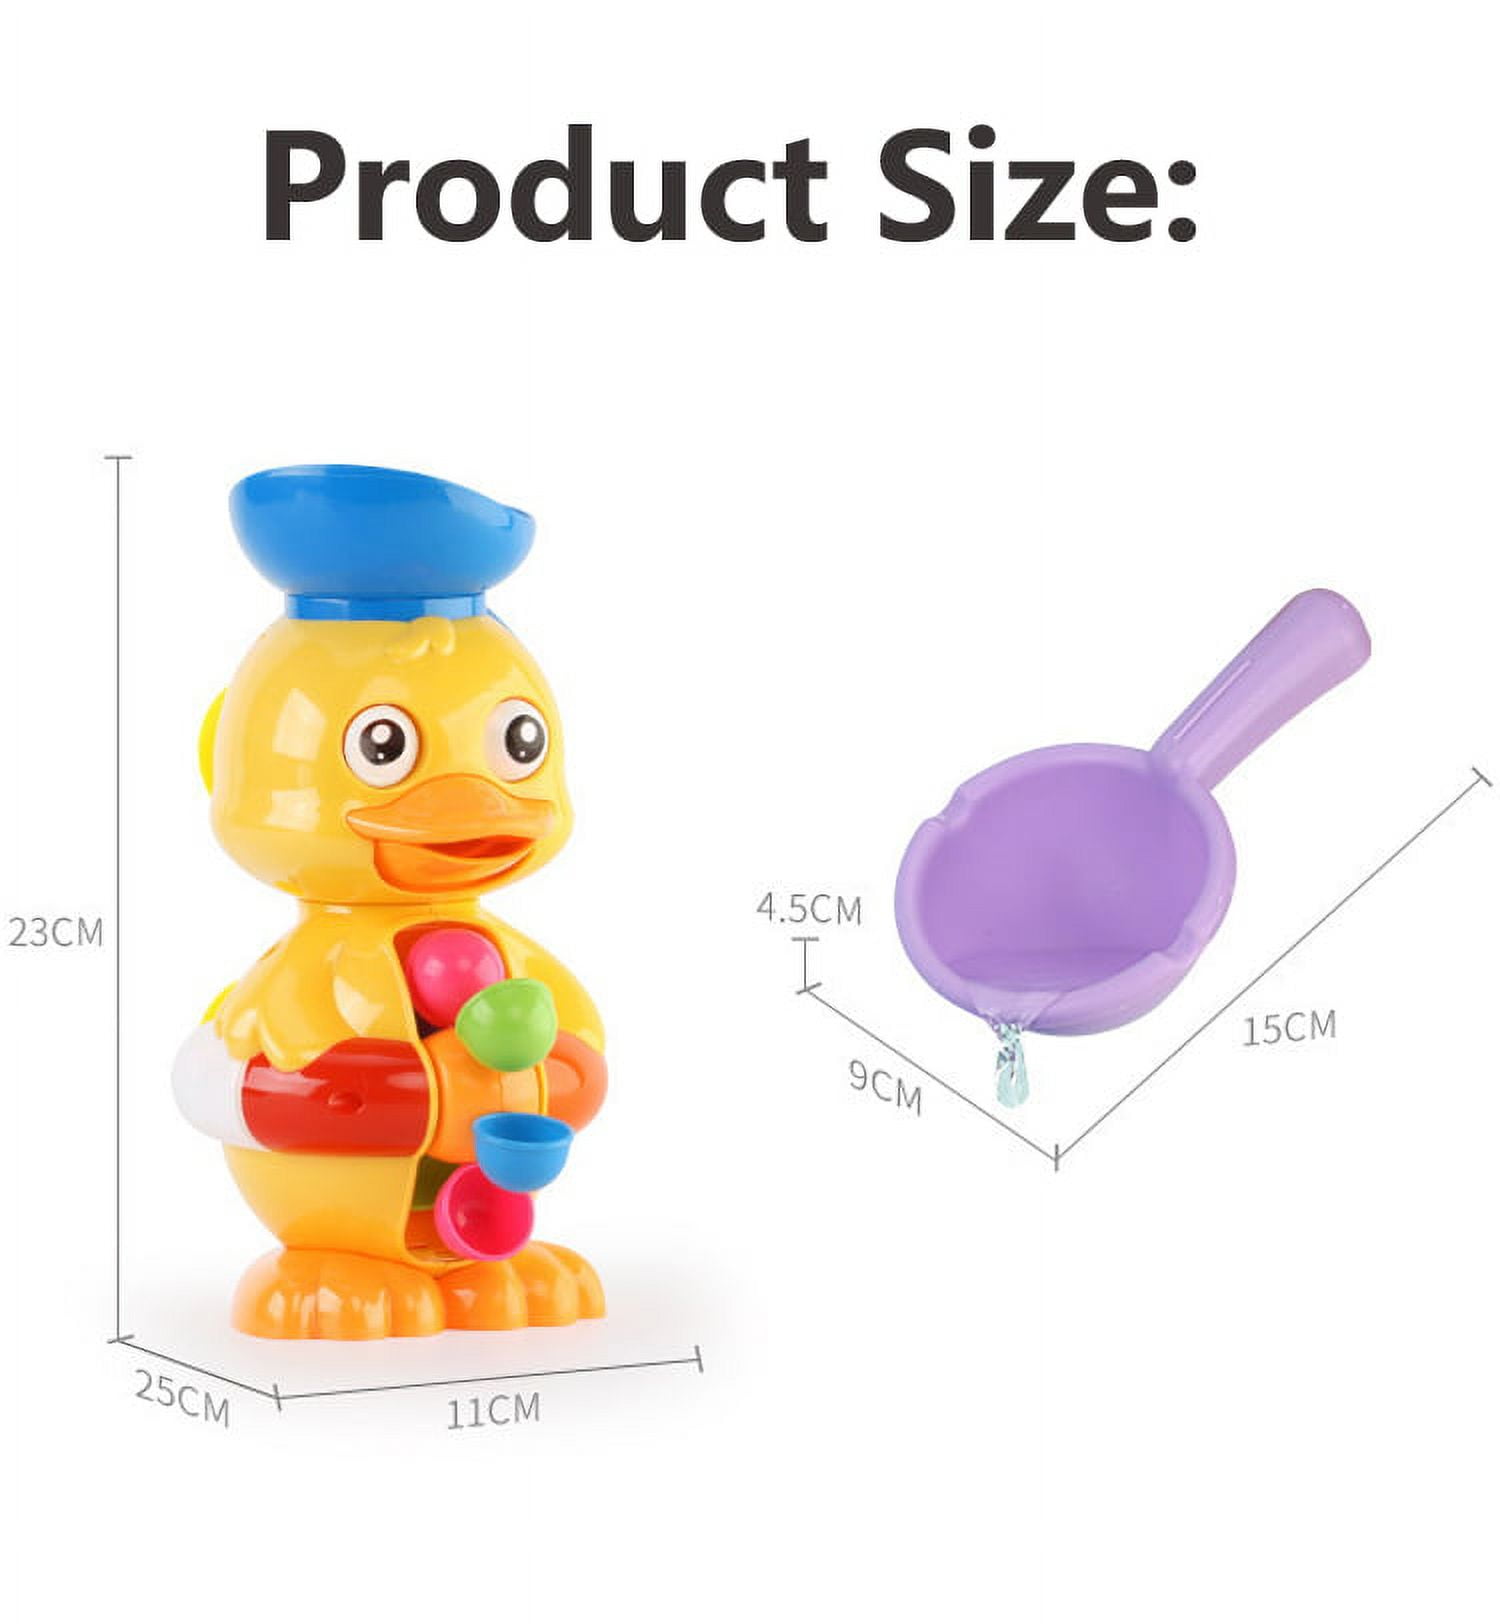 Cheap Bath Toys for Toddlers Age 18 Months 1 2 3 Year Old Girl Boy, Preschool Baby Bathtub Water Toys, Two Floatable Ducks And 4 Strong  Suction Cups